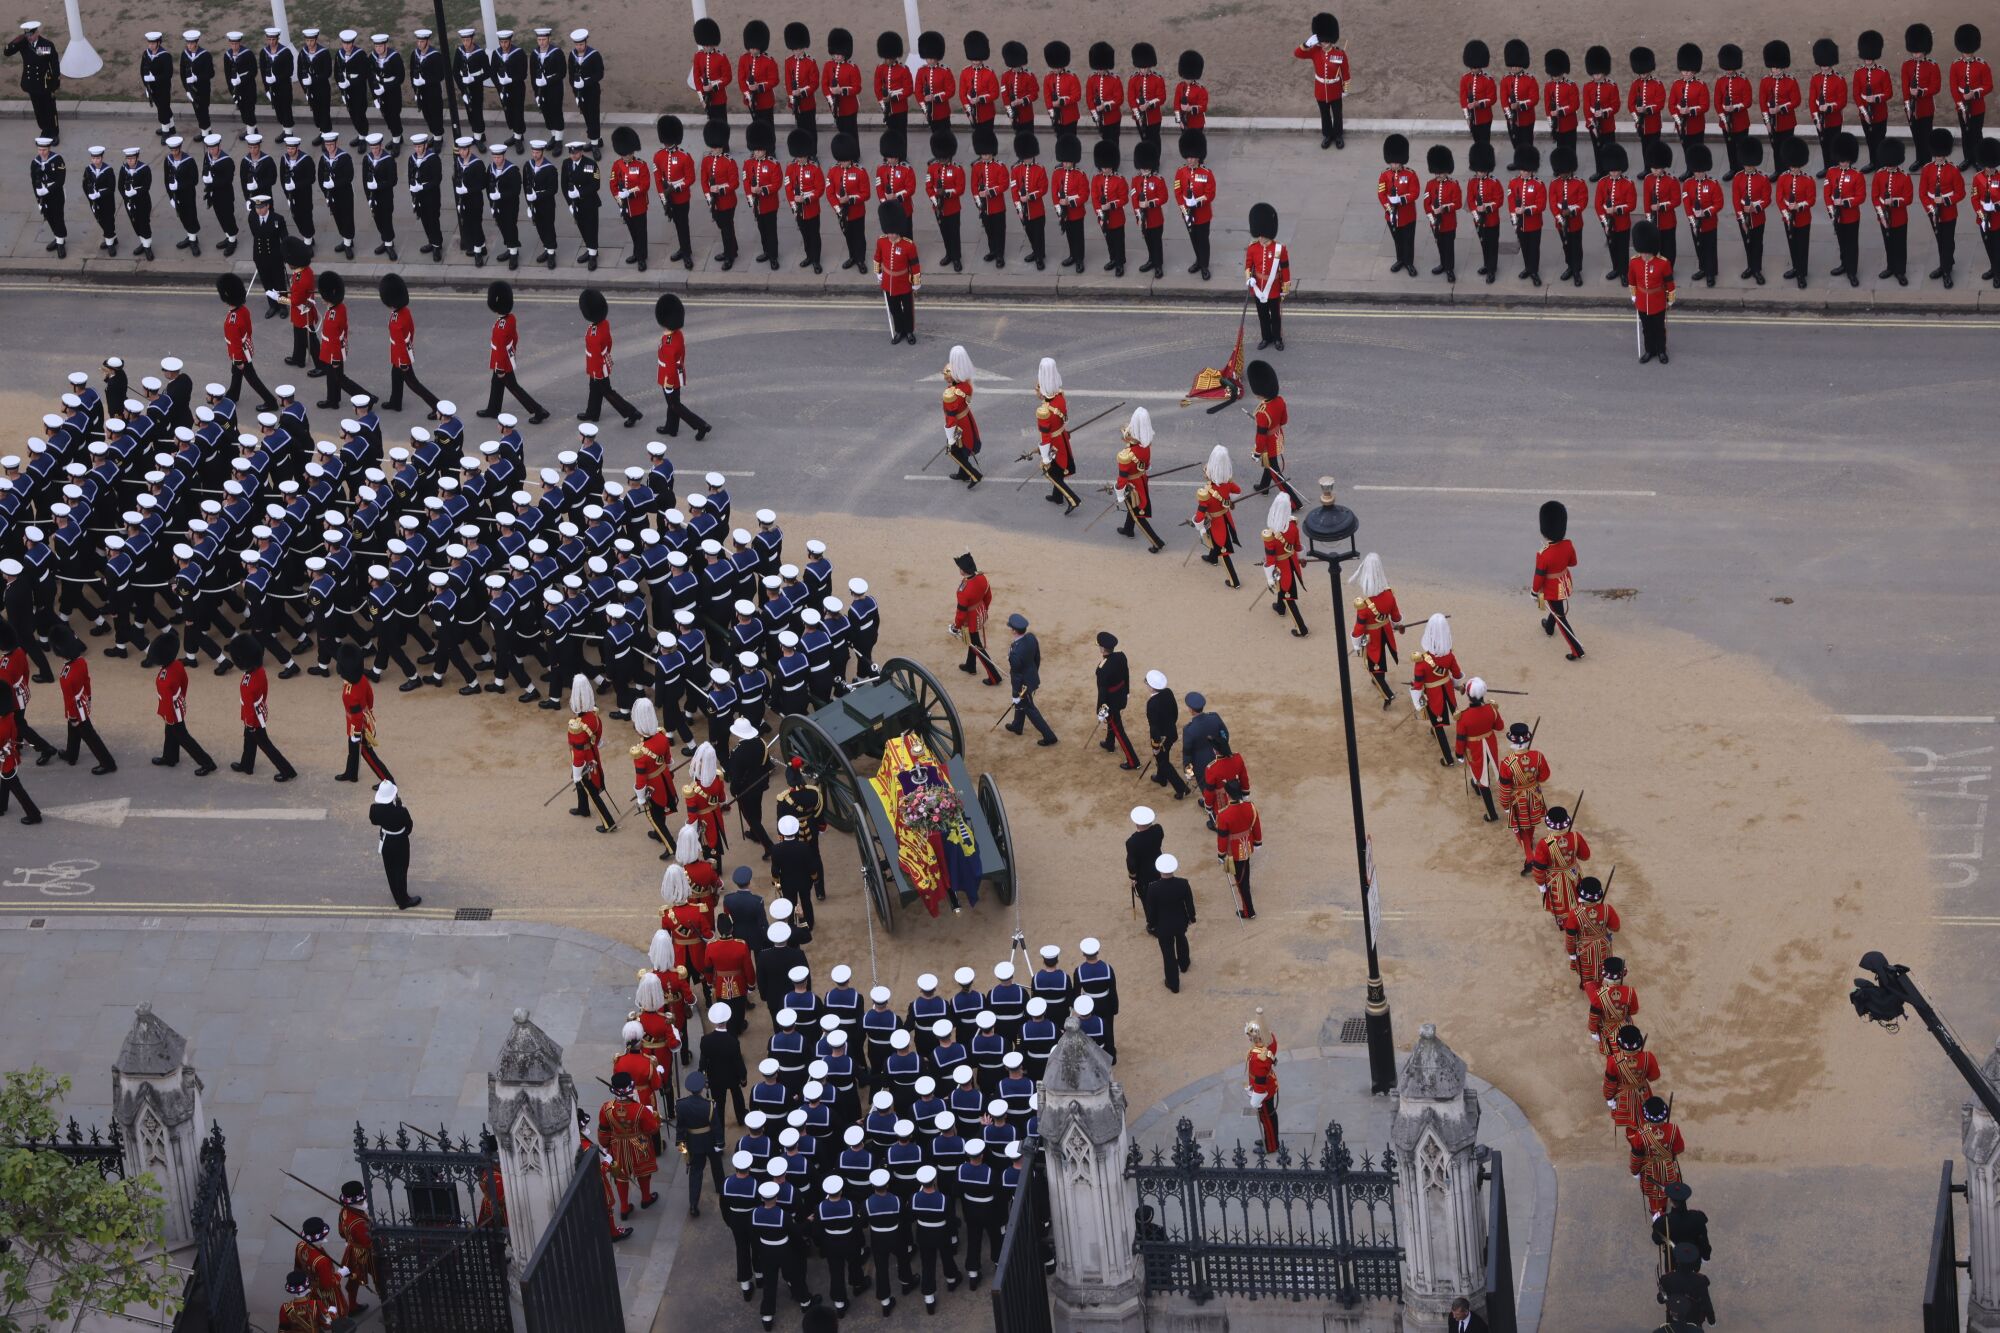 A wide view of the queen's coffin escorted by the troops.